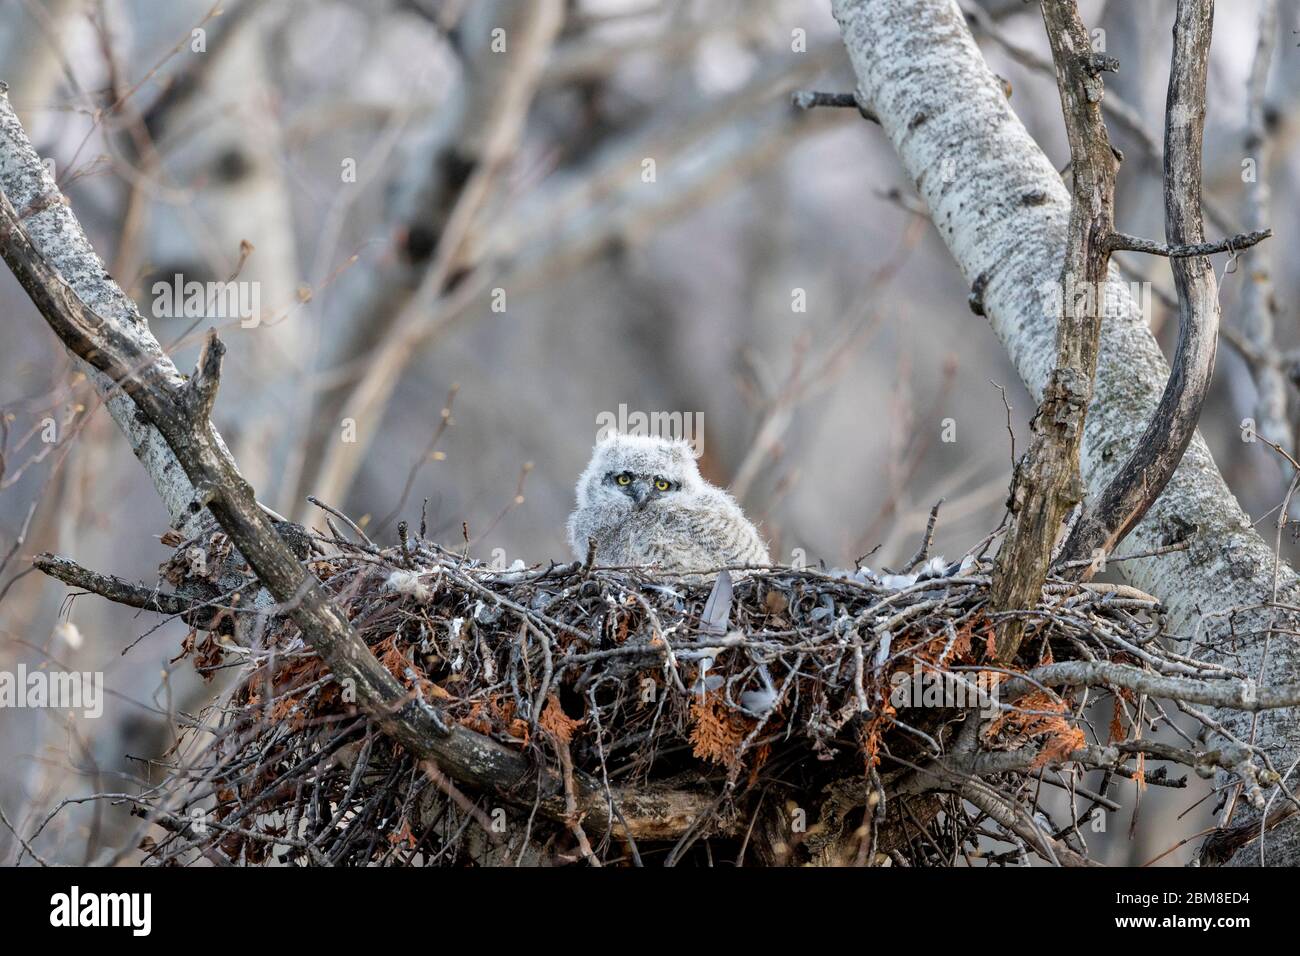 A wild nestling Great Horned Owlet (Bubo Virginianus), part of the Strigiformes order, and Strigidae family, sits in a stick nest. Stock Photo